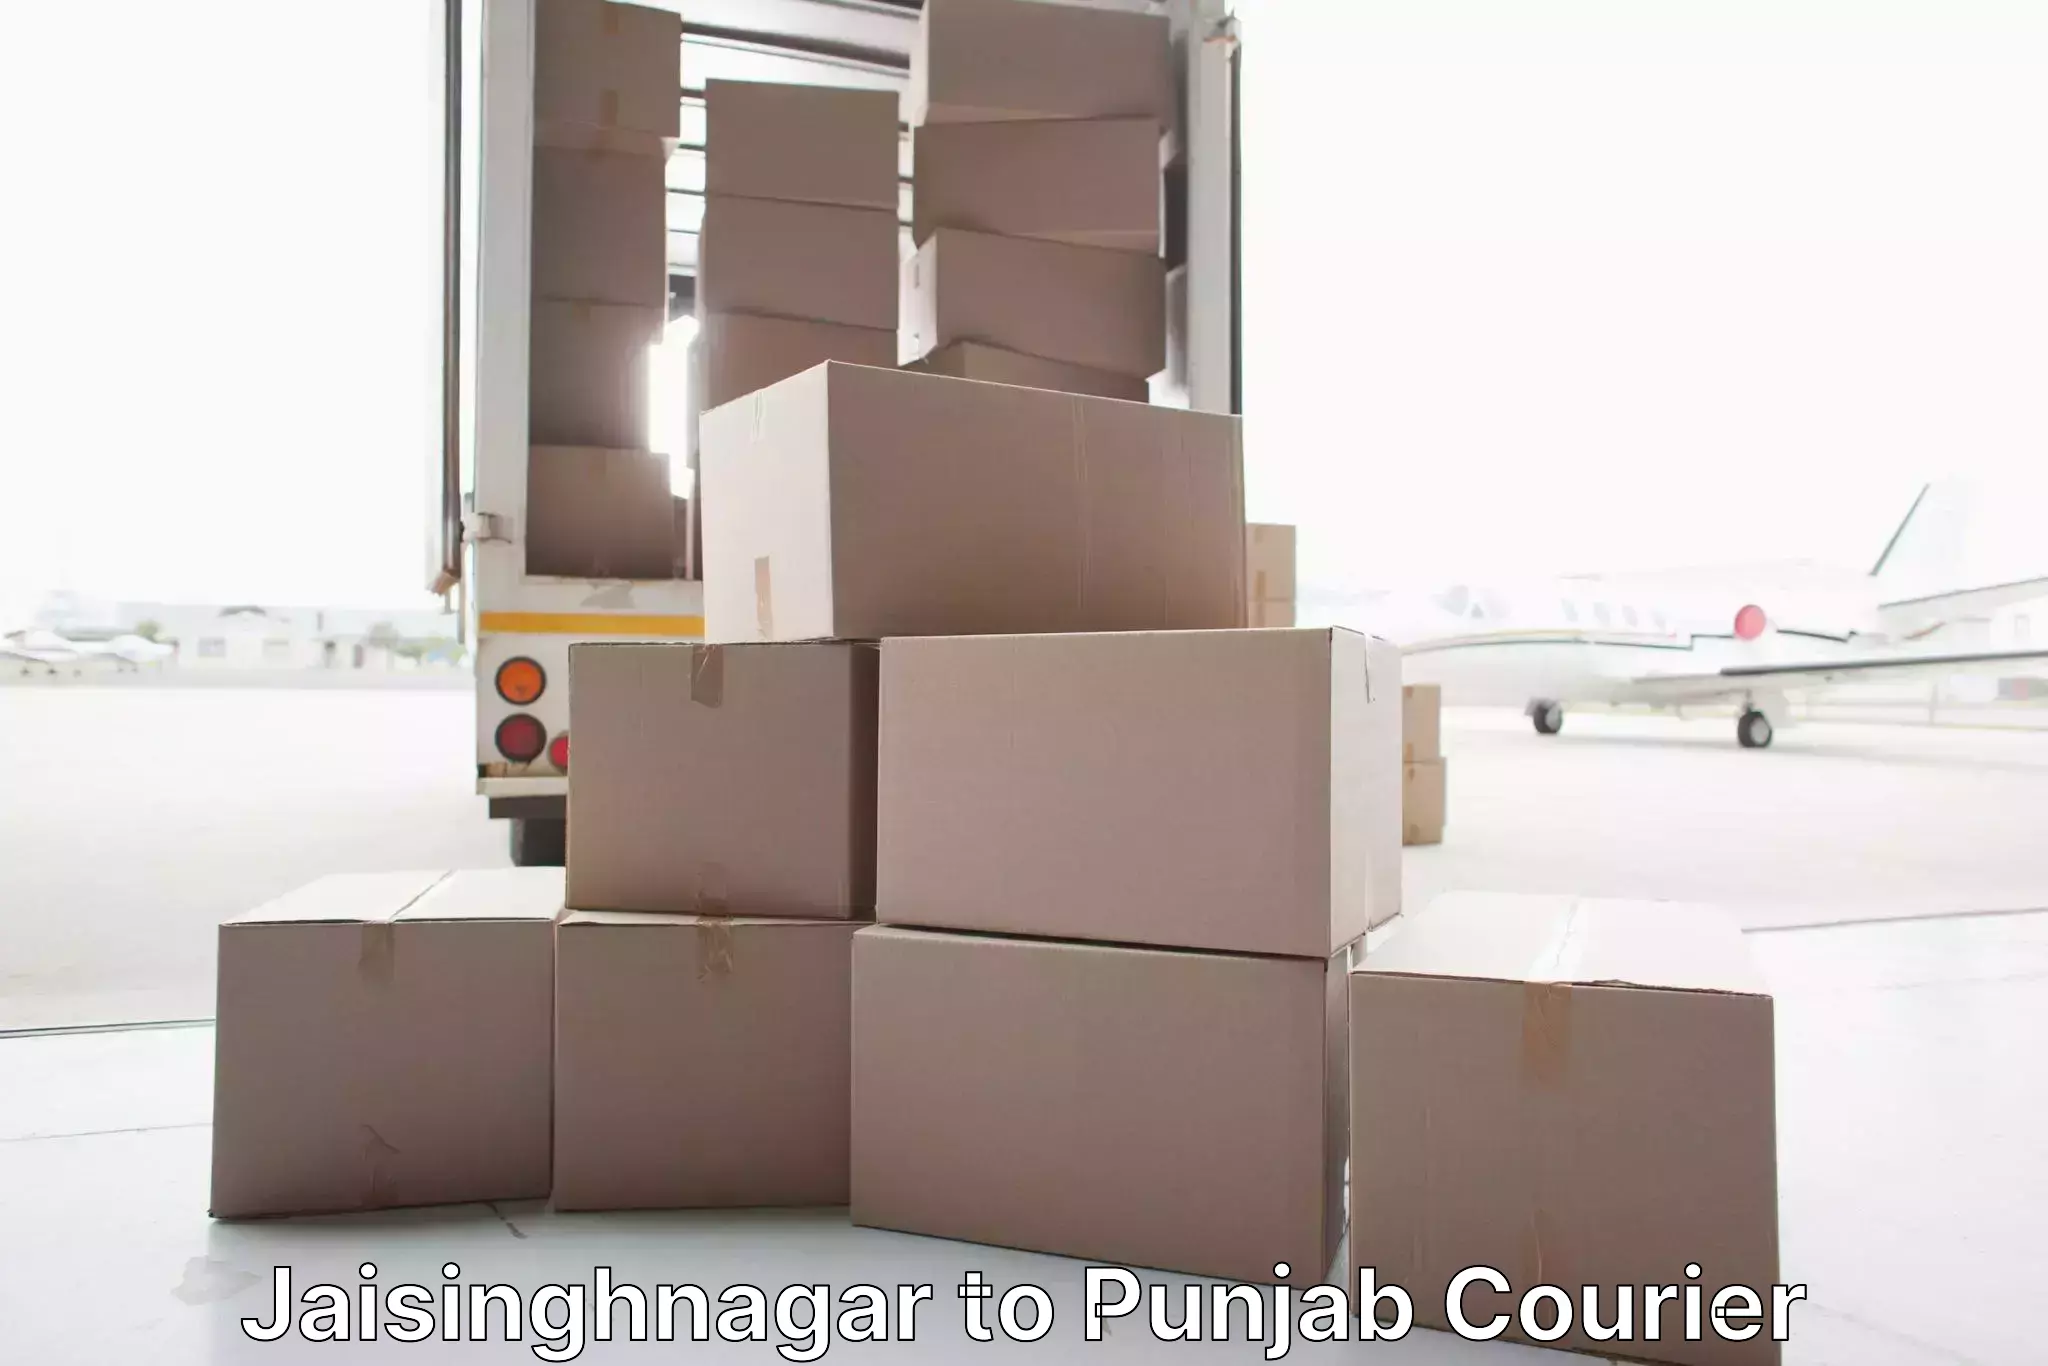 Quality moving company in Jaisinghnagar to Punjab